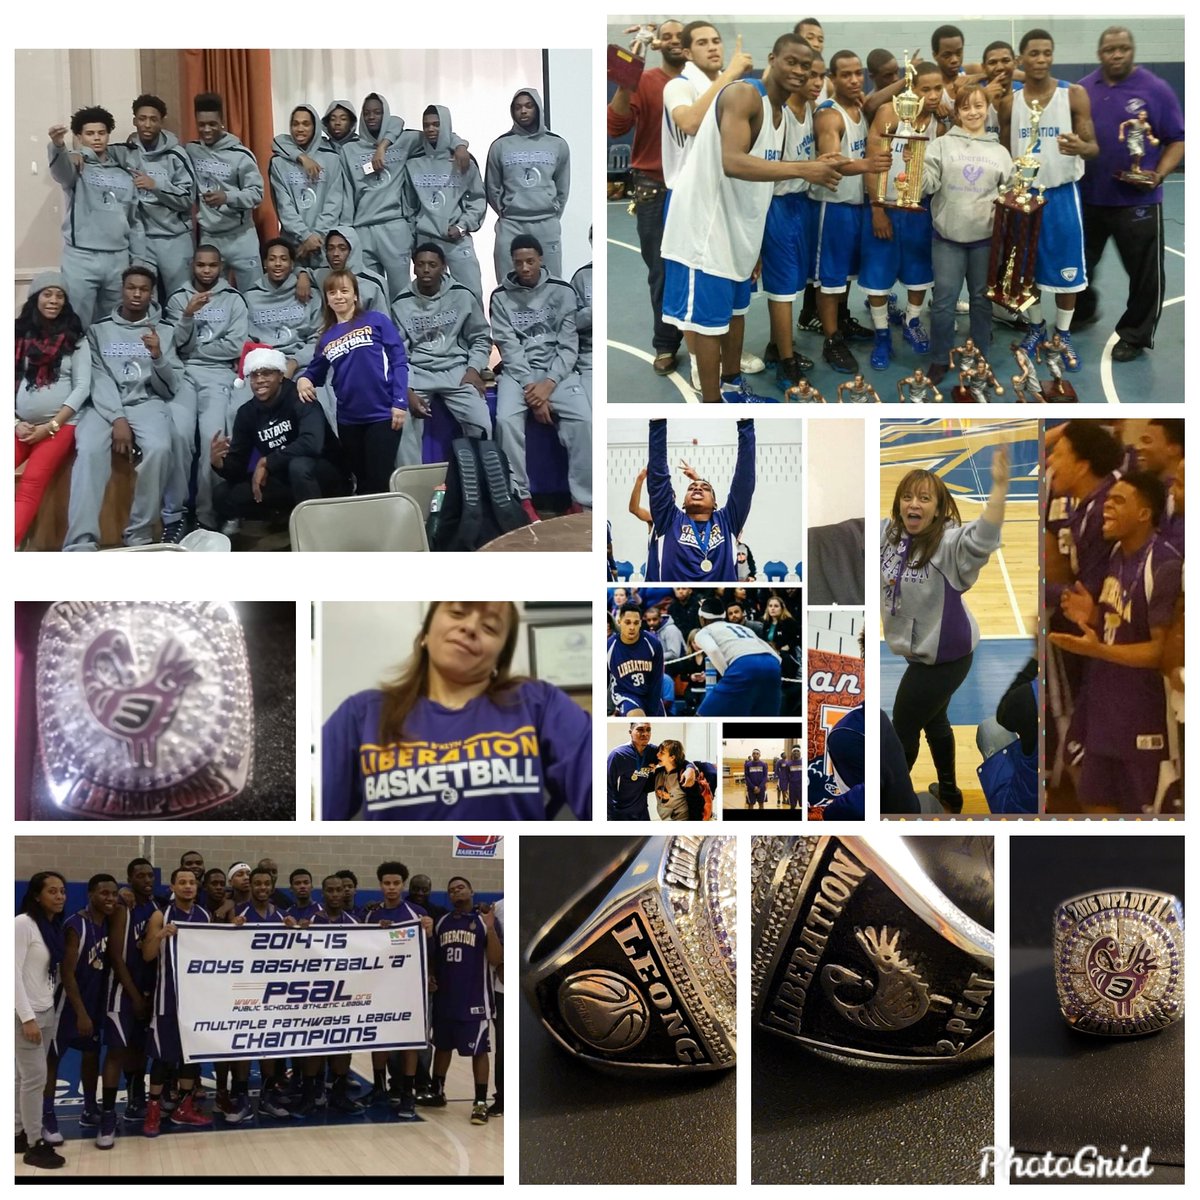 Reminiscing...2Peat Champions...miss my kids #Libnation #principalmom #principalcoach #OSGSTRONG #berevolutionary #leadwithlove